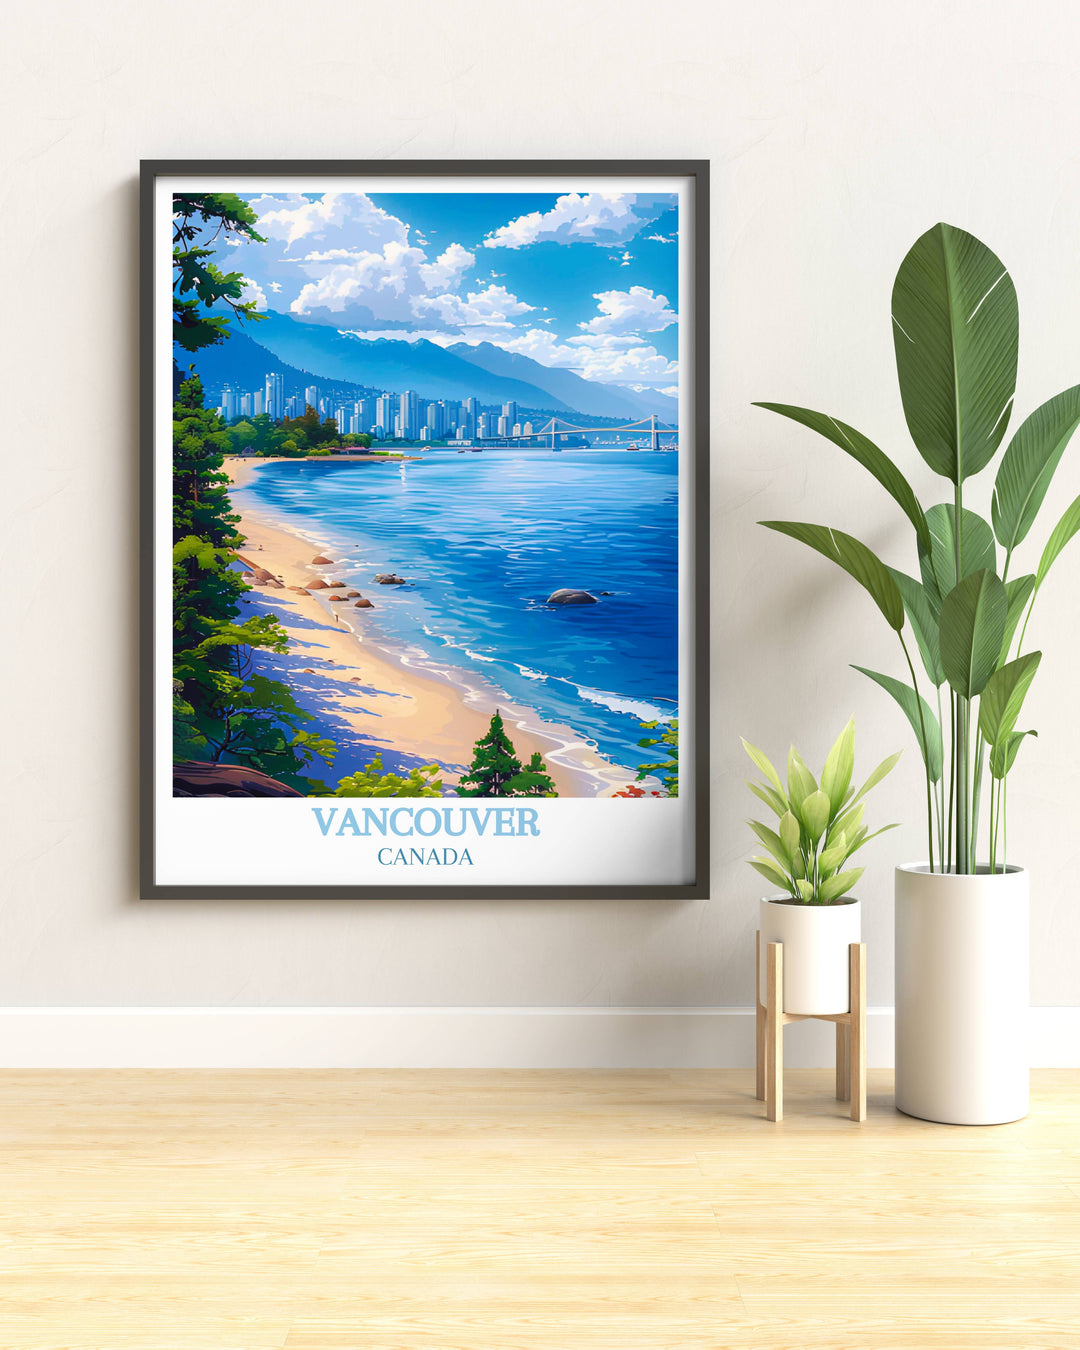 High quality Canada prints featuring Vancouvers iconic landmarks and scenic landscapes. Adds a touch of elegance to any room.